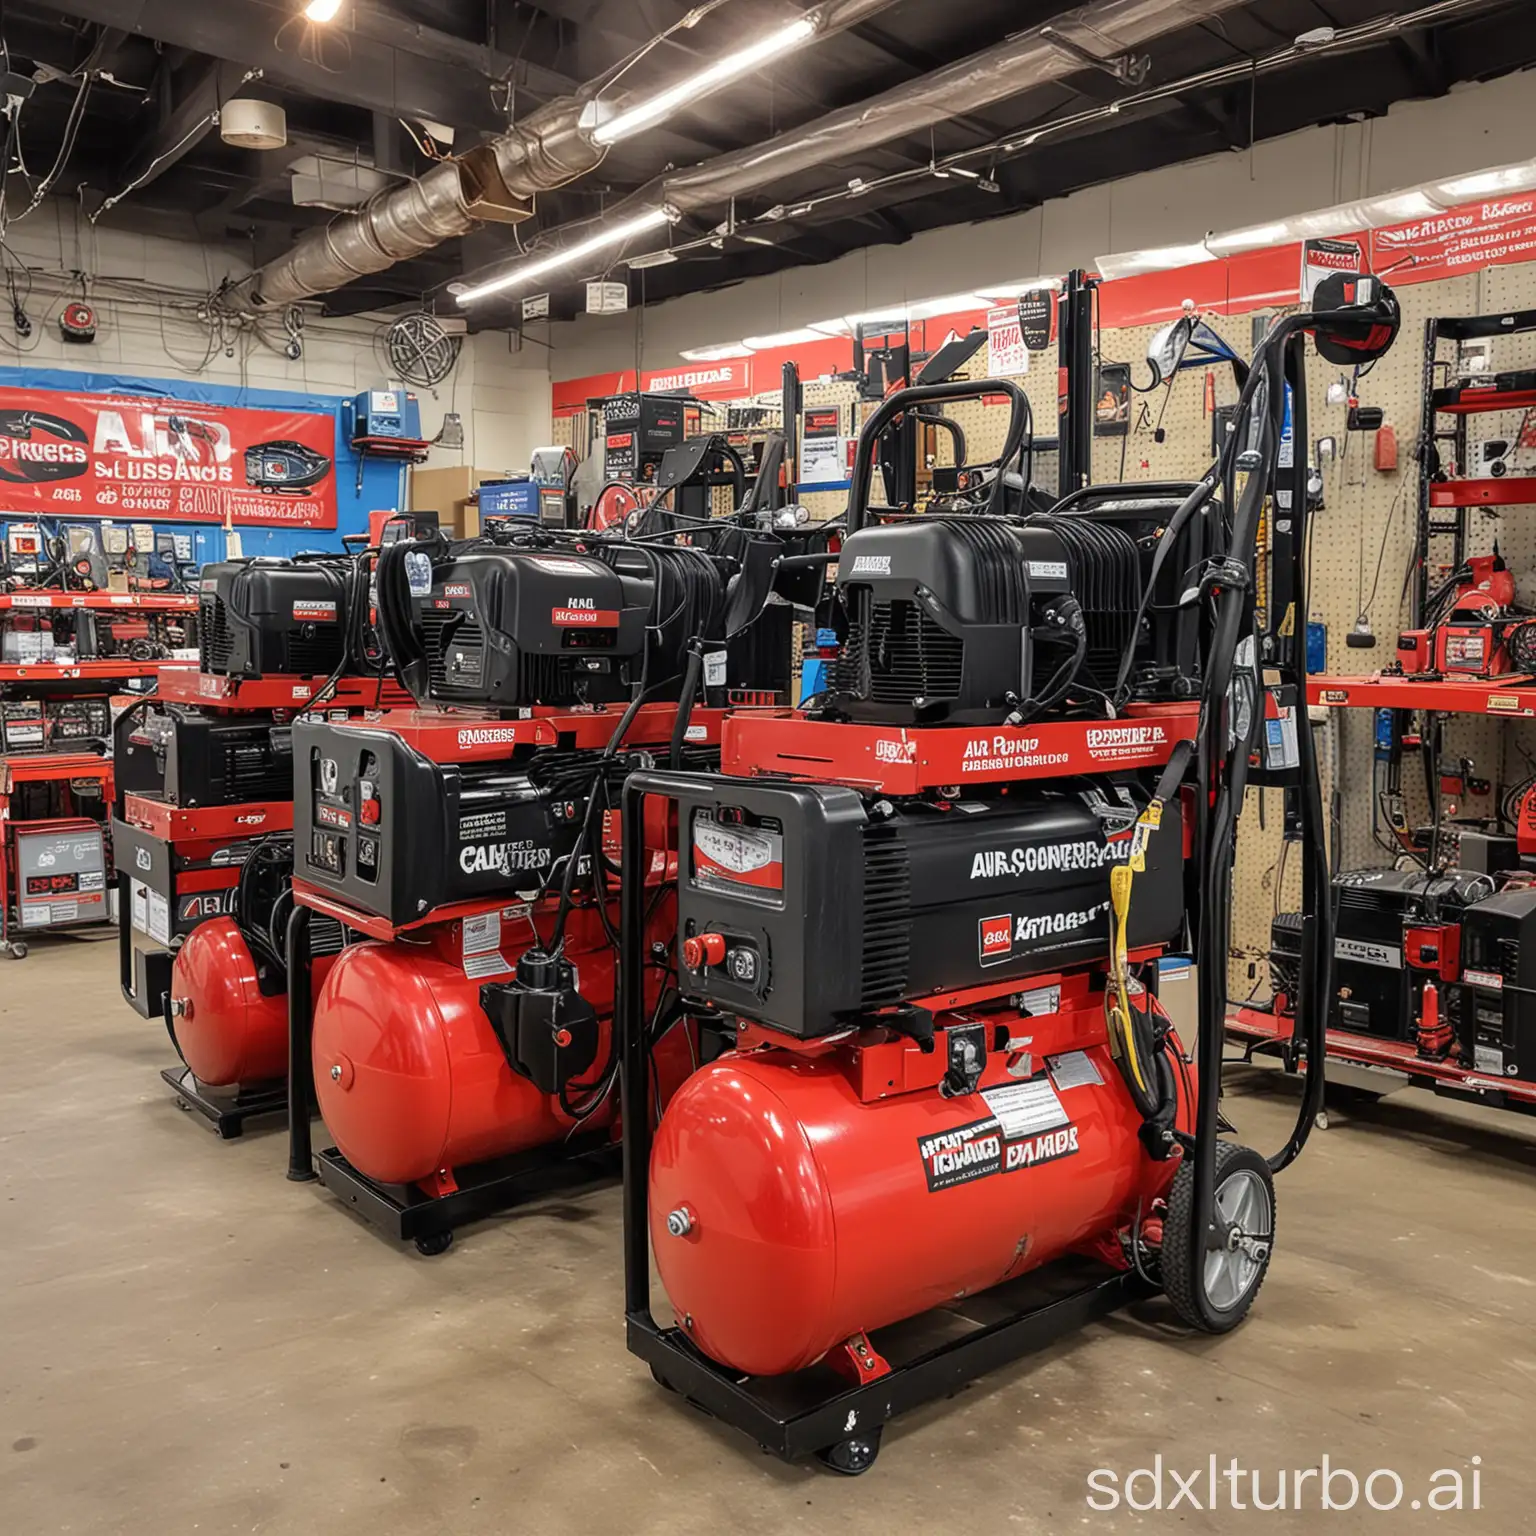 Various-Air-Compressors-Displayed-in-a-Store-Setting